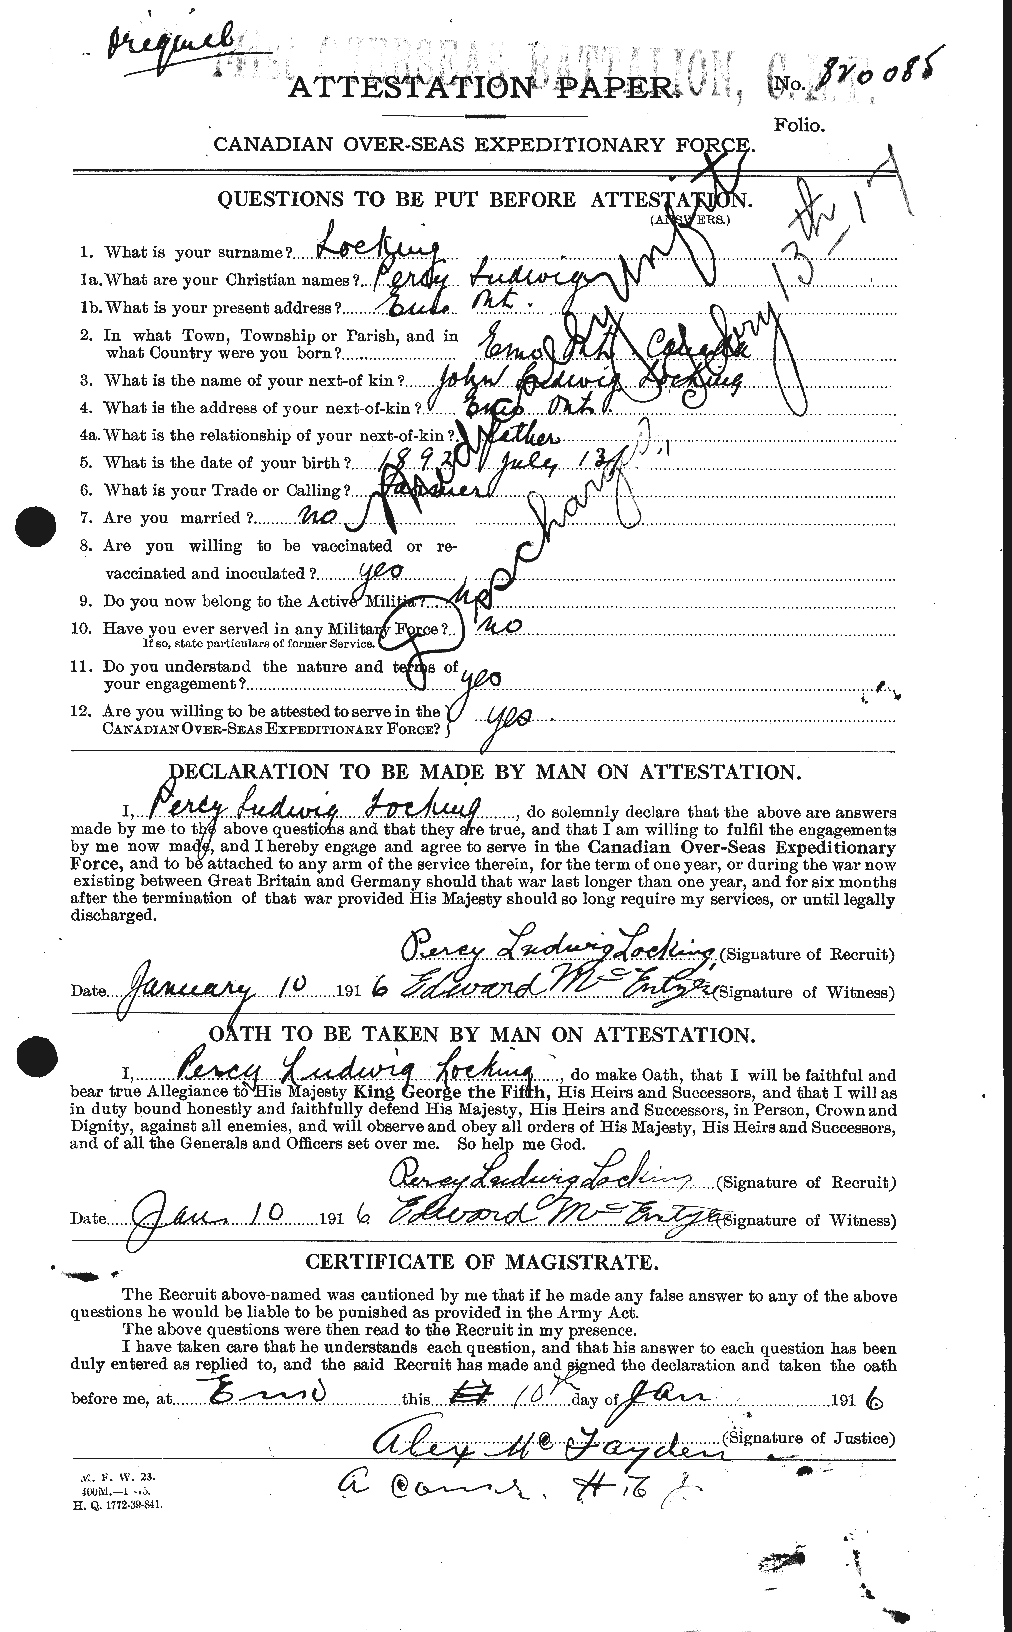 Personnel Records of the First World War - CEF 464640a